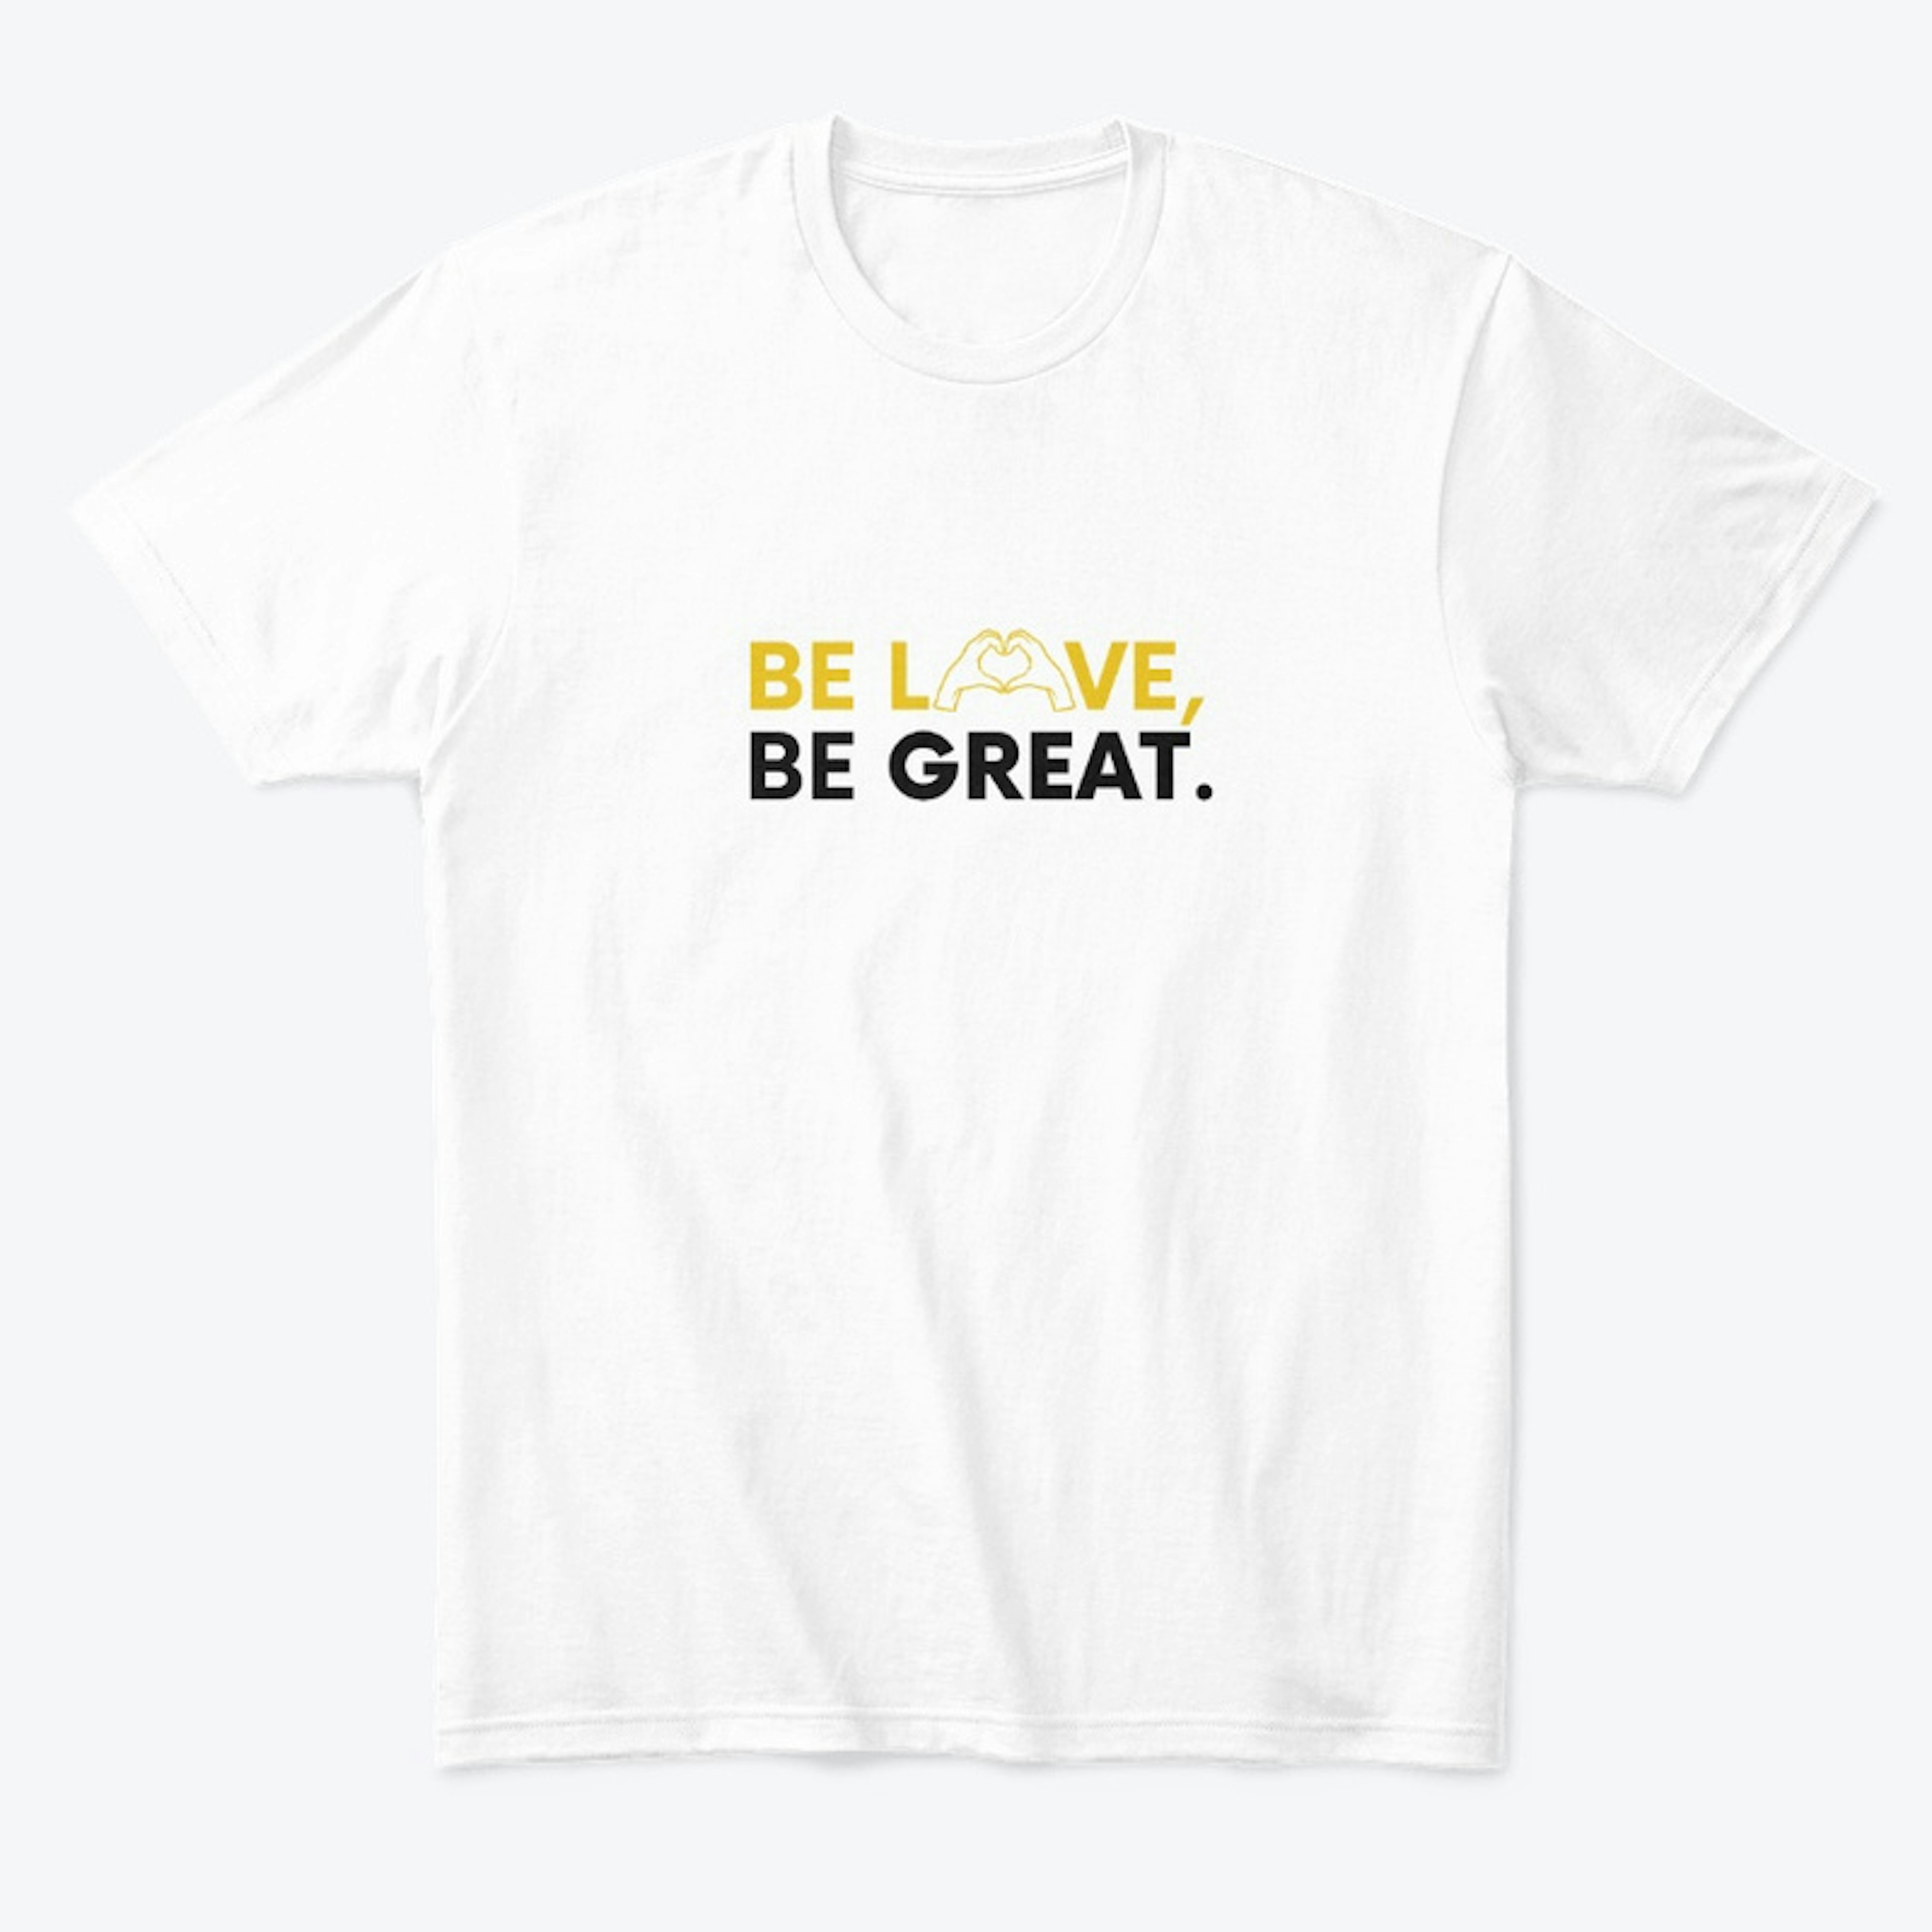 Be Great, Be Love - Light Tee